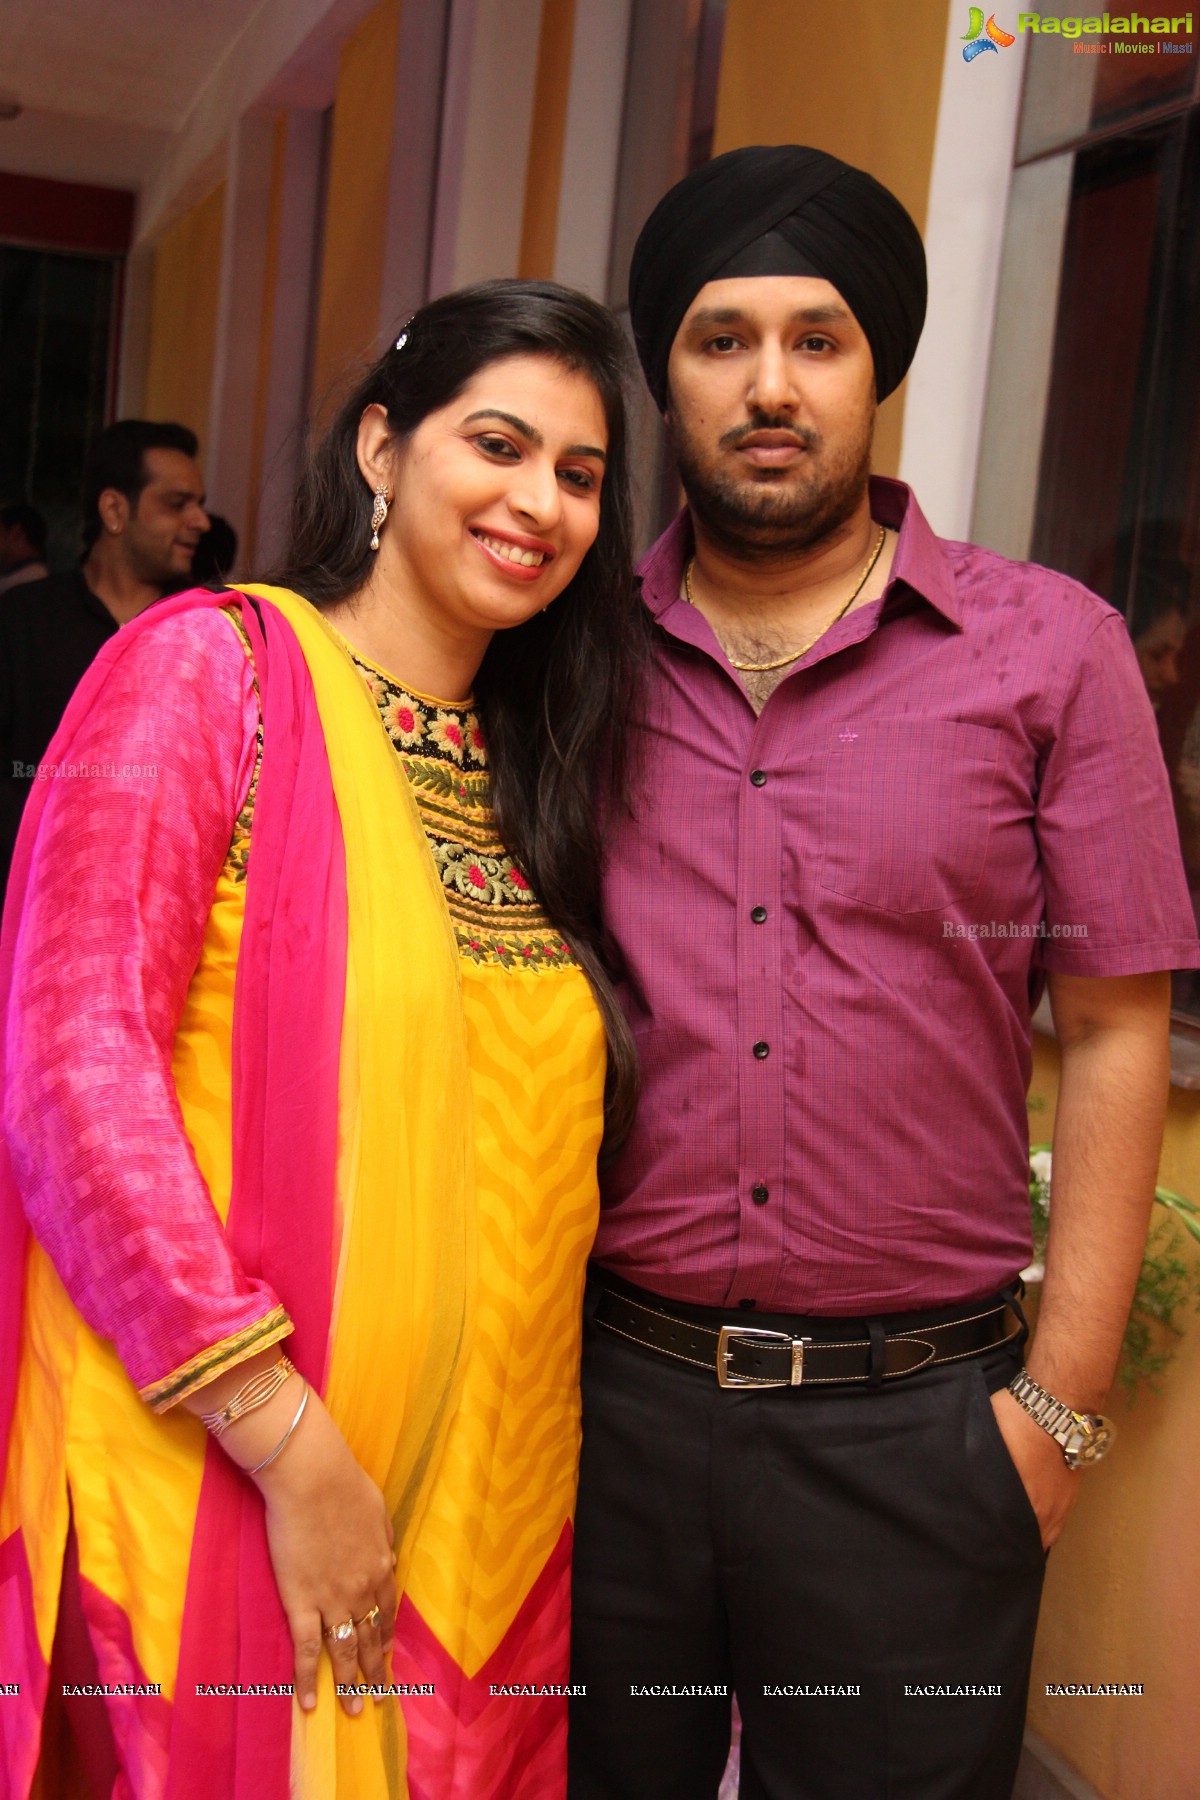 Eid Dinner Party 2014 at Naijer Function Hall, Hyderabad